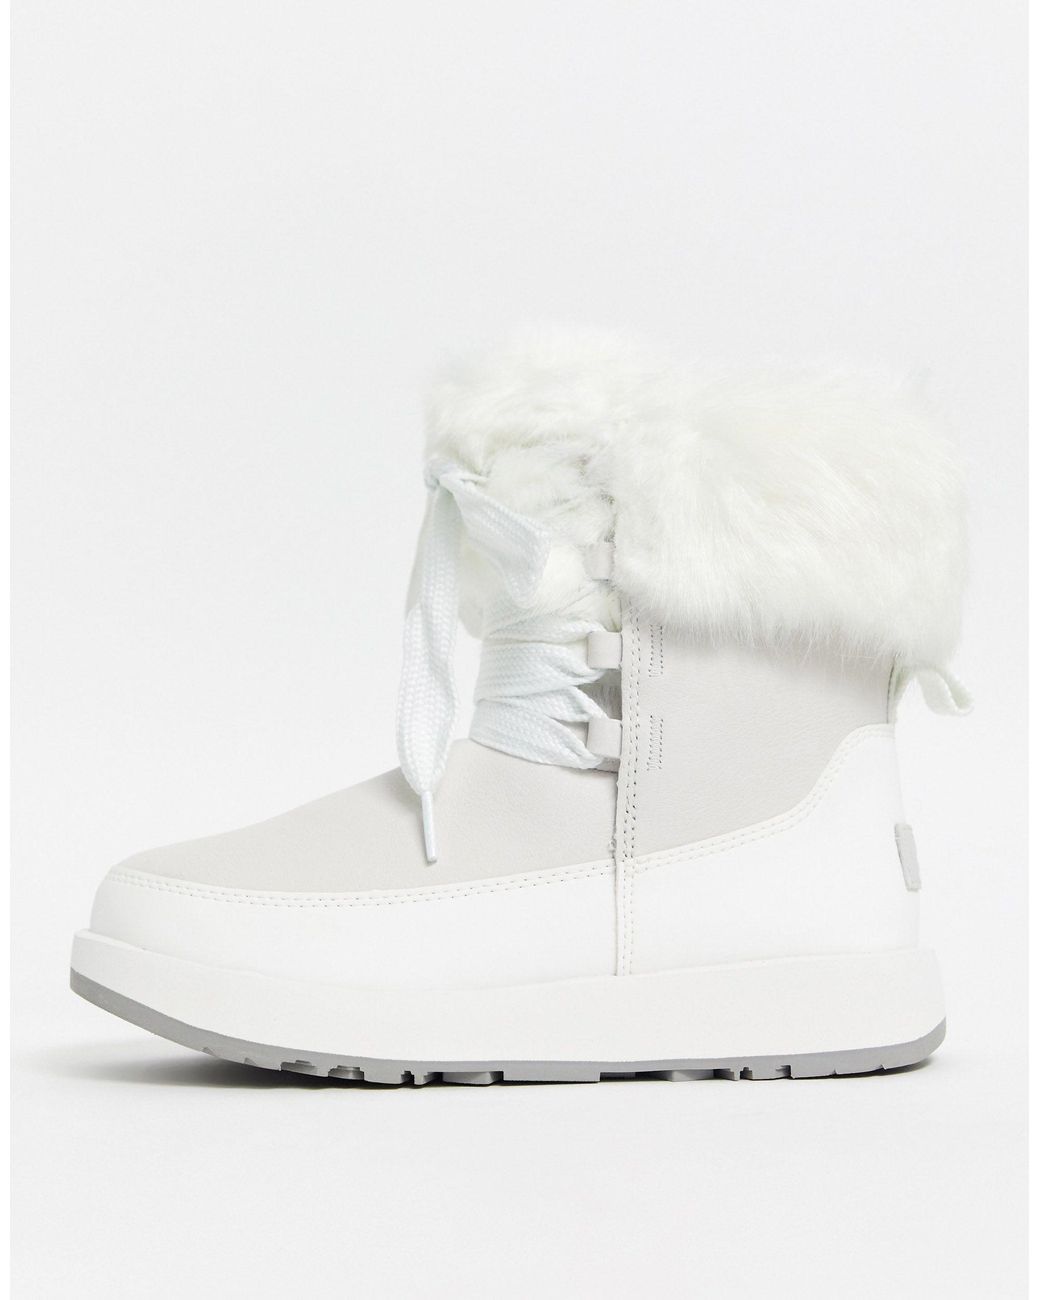 UGG Gracie Waterproof Fluffy Ankle Boots in White | Lyst Australia